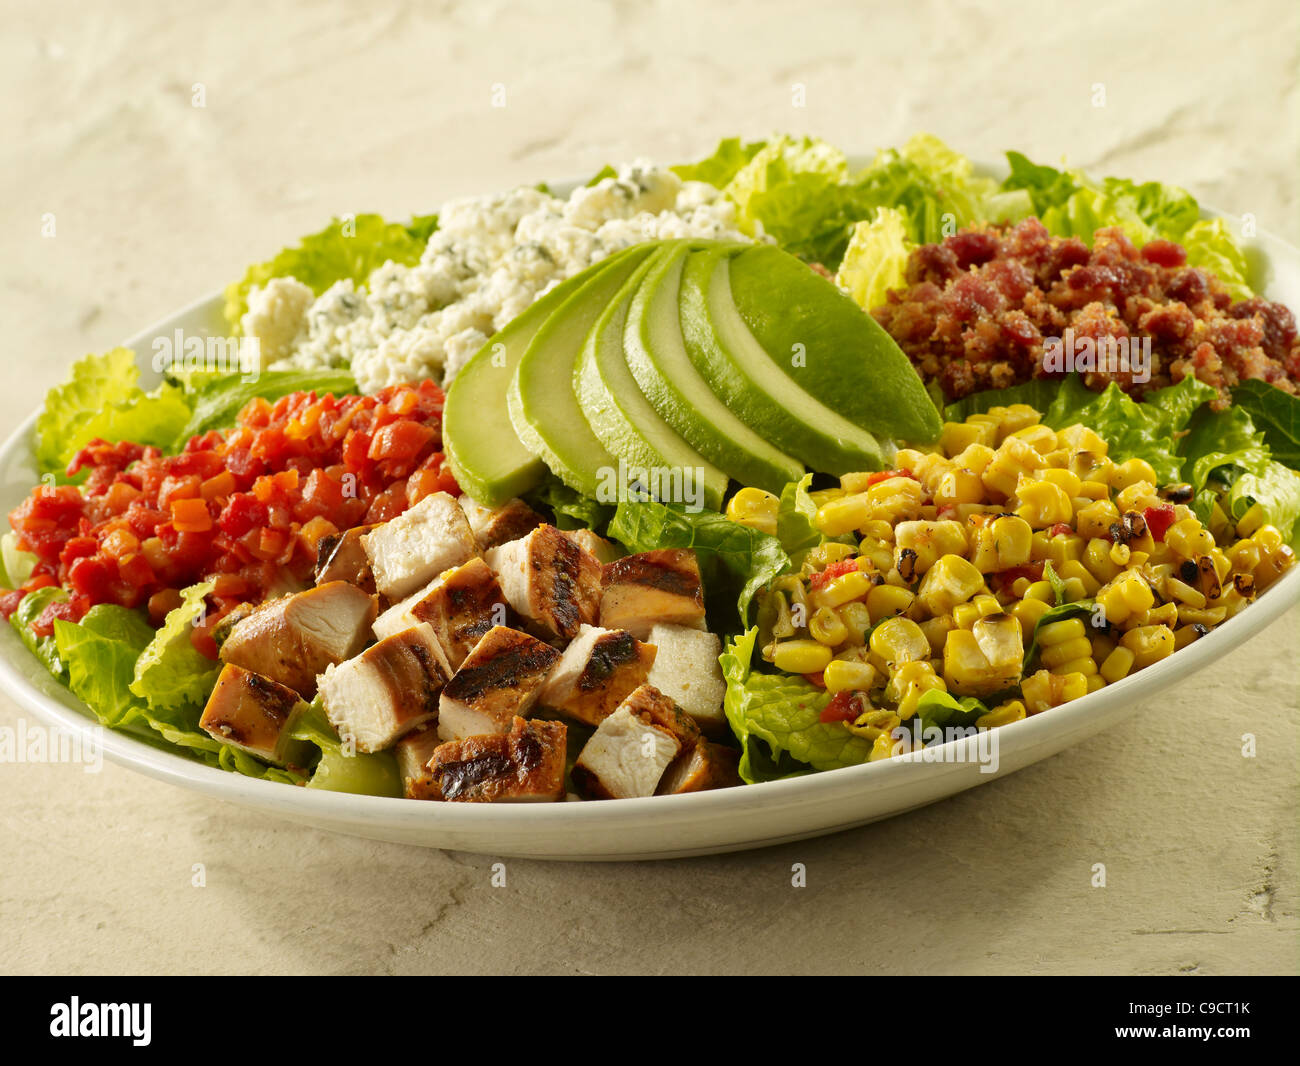 Chopped grilled chicken salad with bacon, corn, cheese, tomato, lettuce and sliced avocado Stock Photo